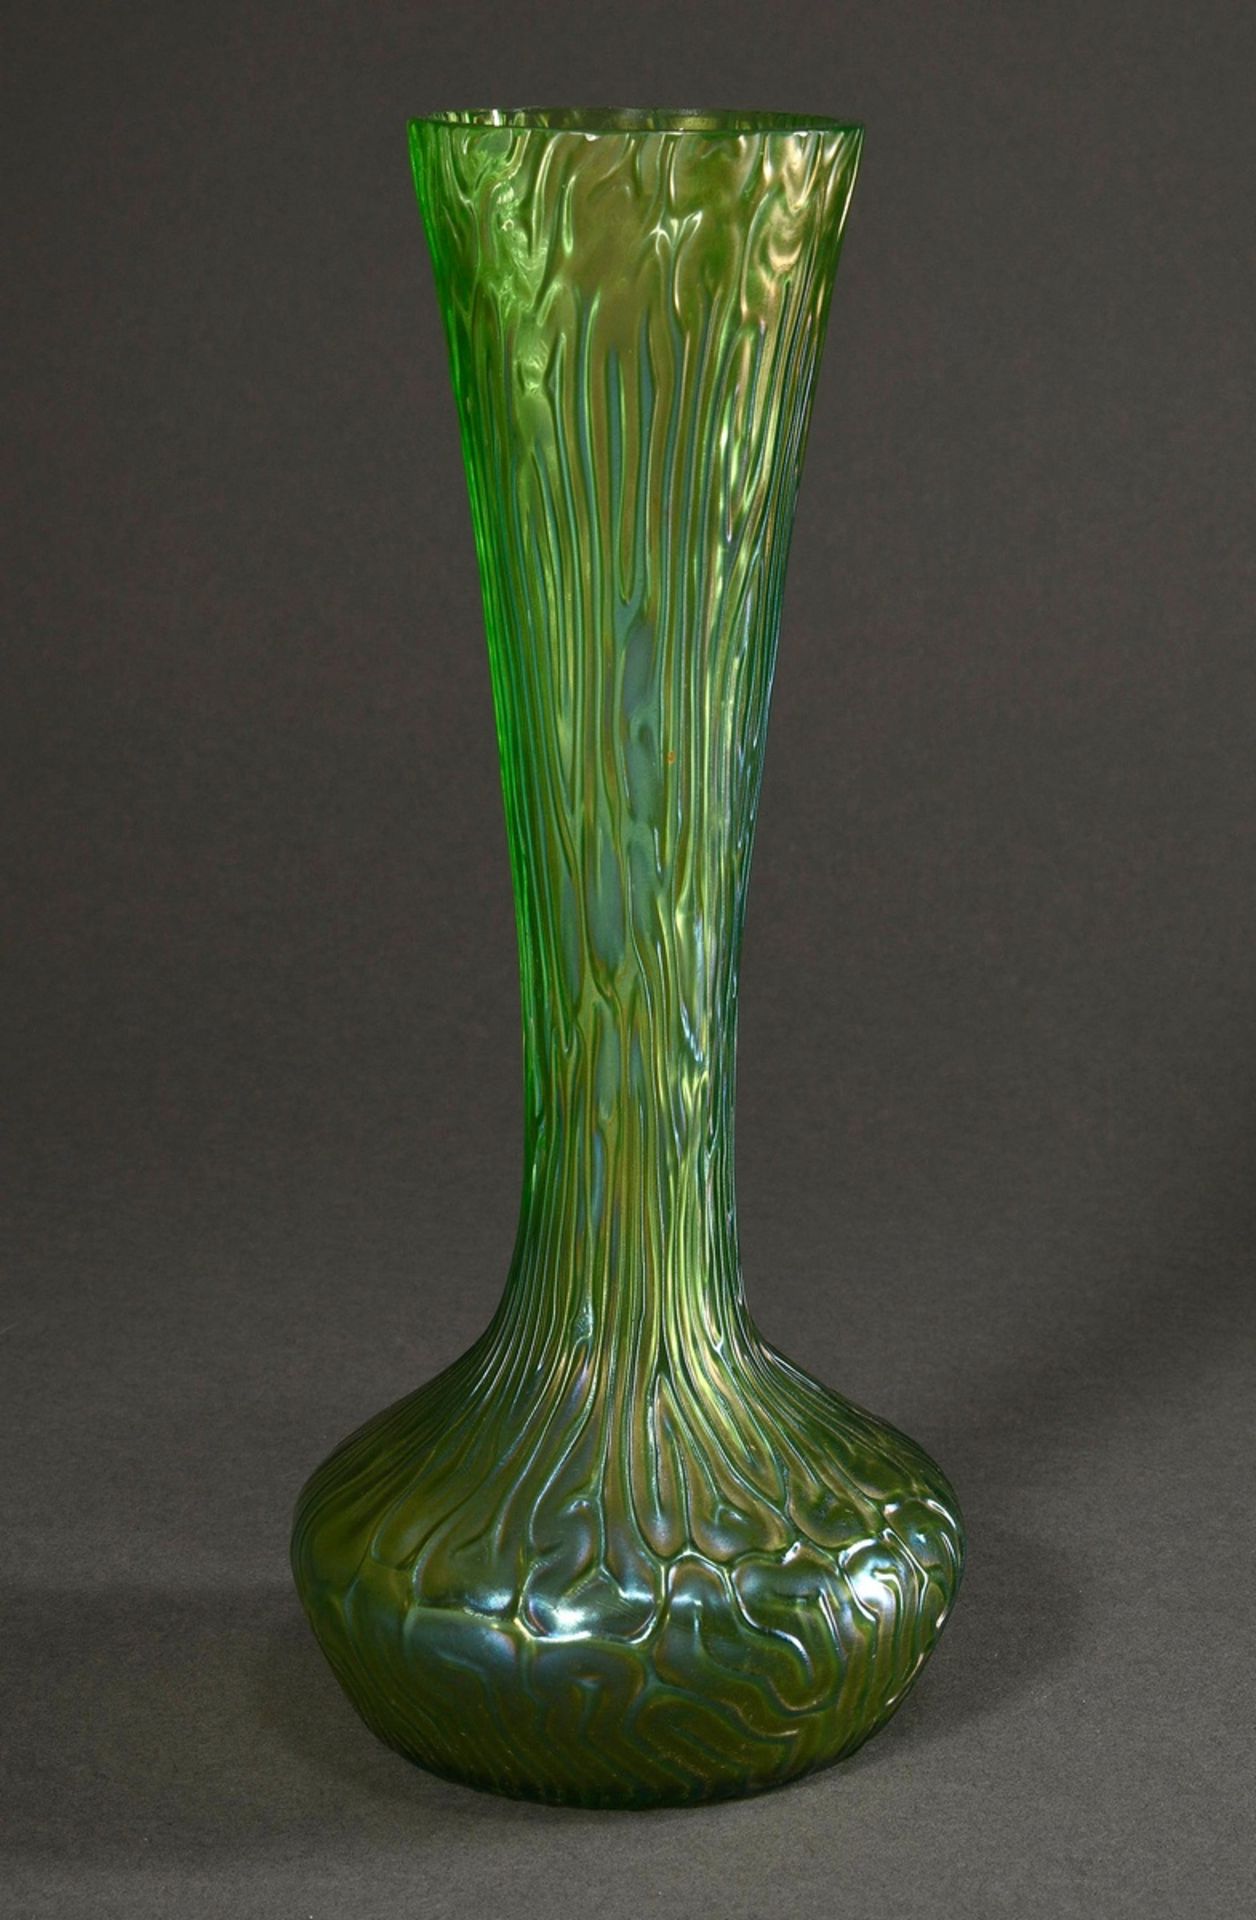 Green iridescent art nouveau baluster vase with conical neck and bark pattern, h. 25cm